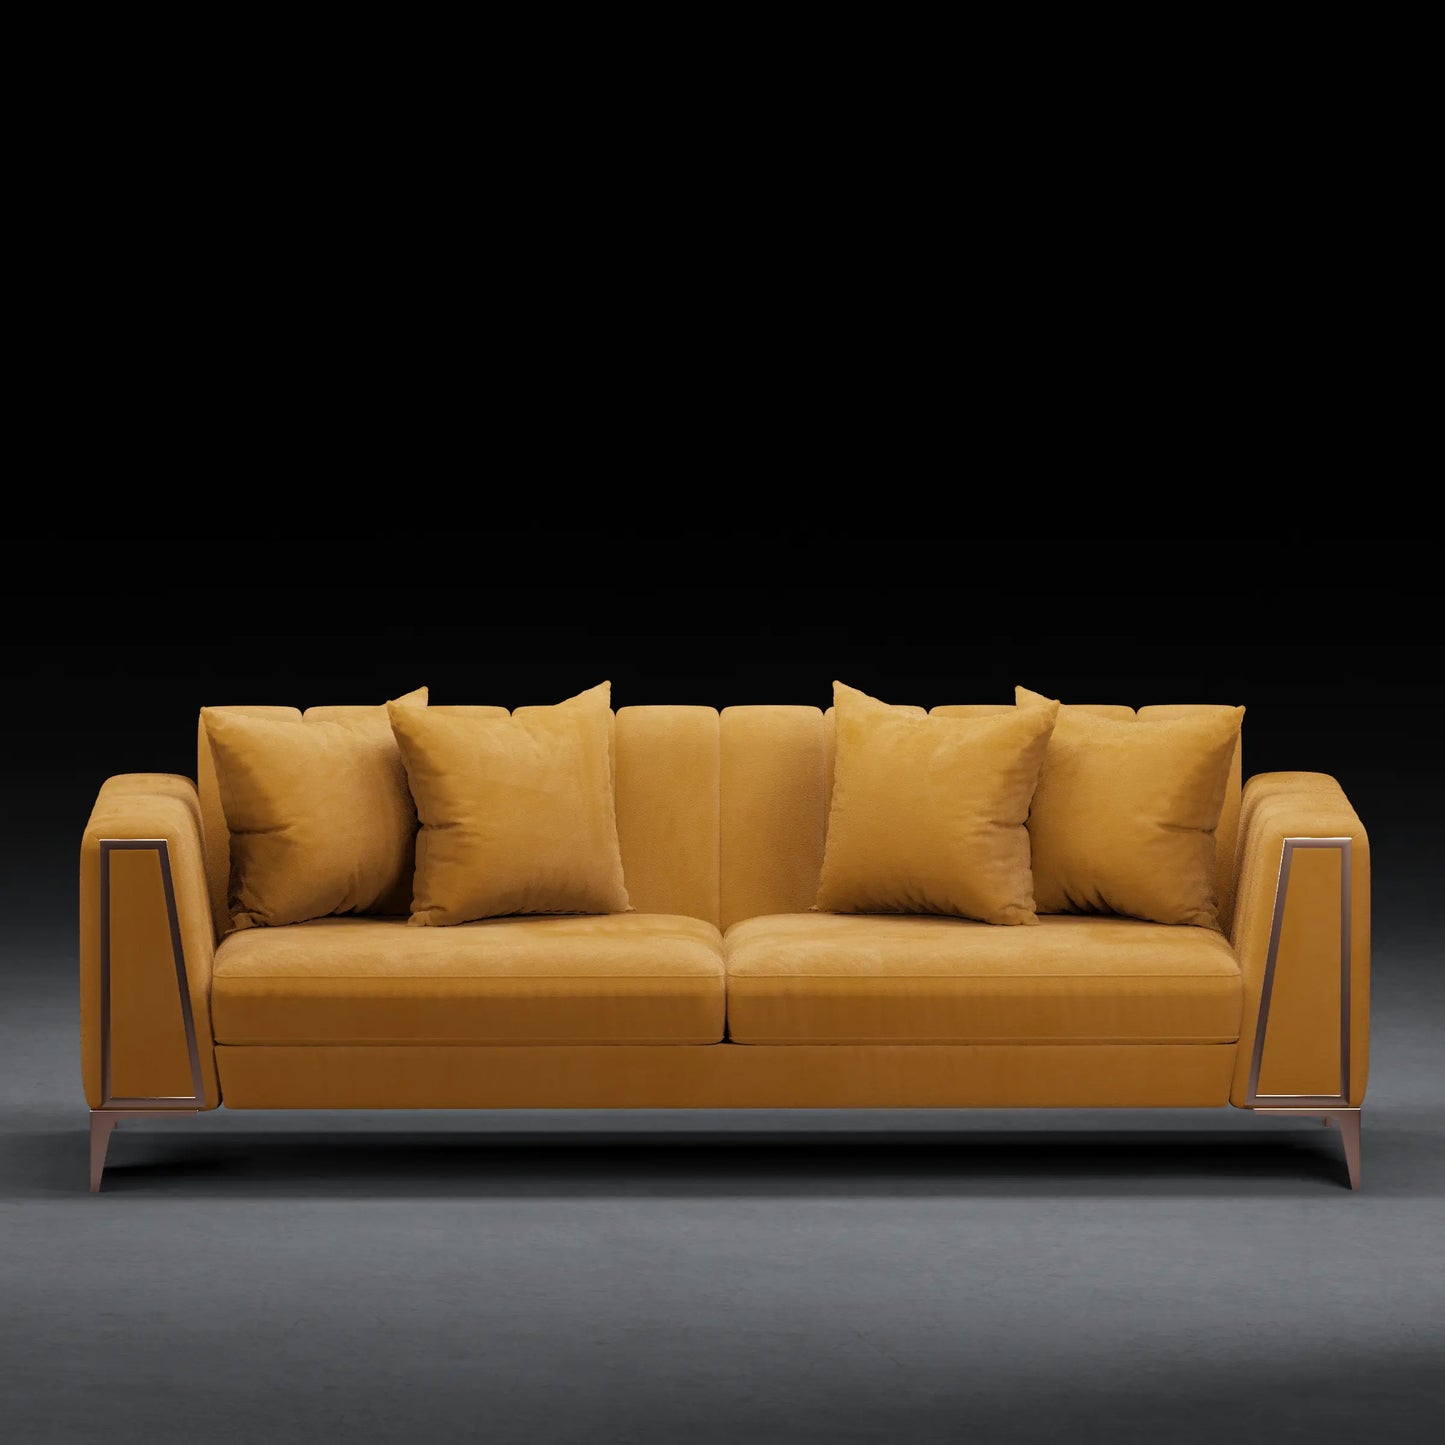 Grape - Contemporary 4 Seater Couch in Velvet Finish | Yellow Ochre Color